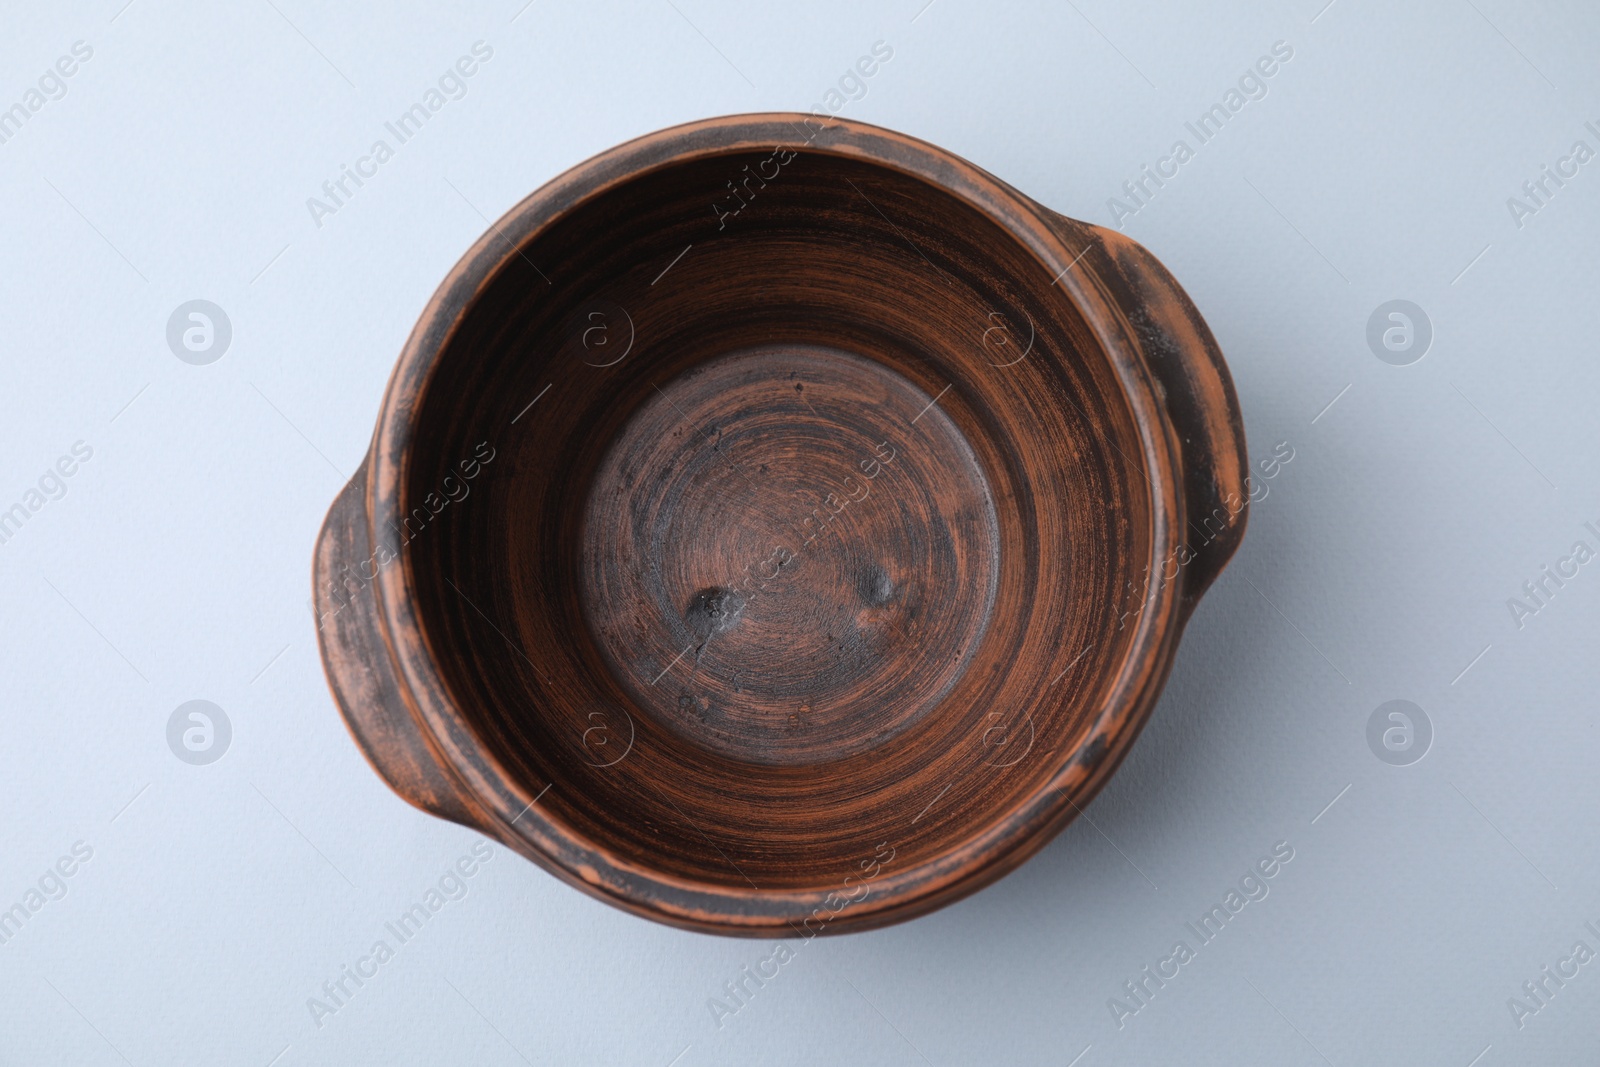 Photo of Ceramic bowl on white background, top view